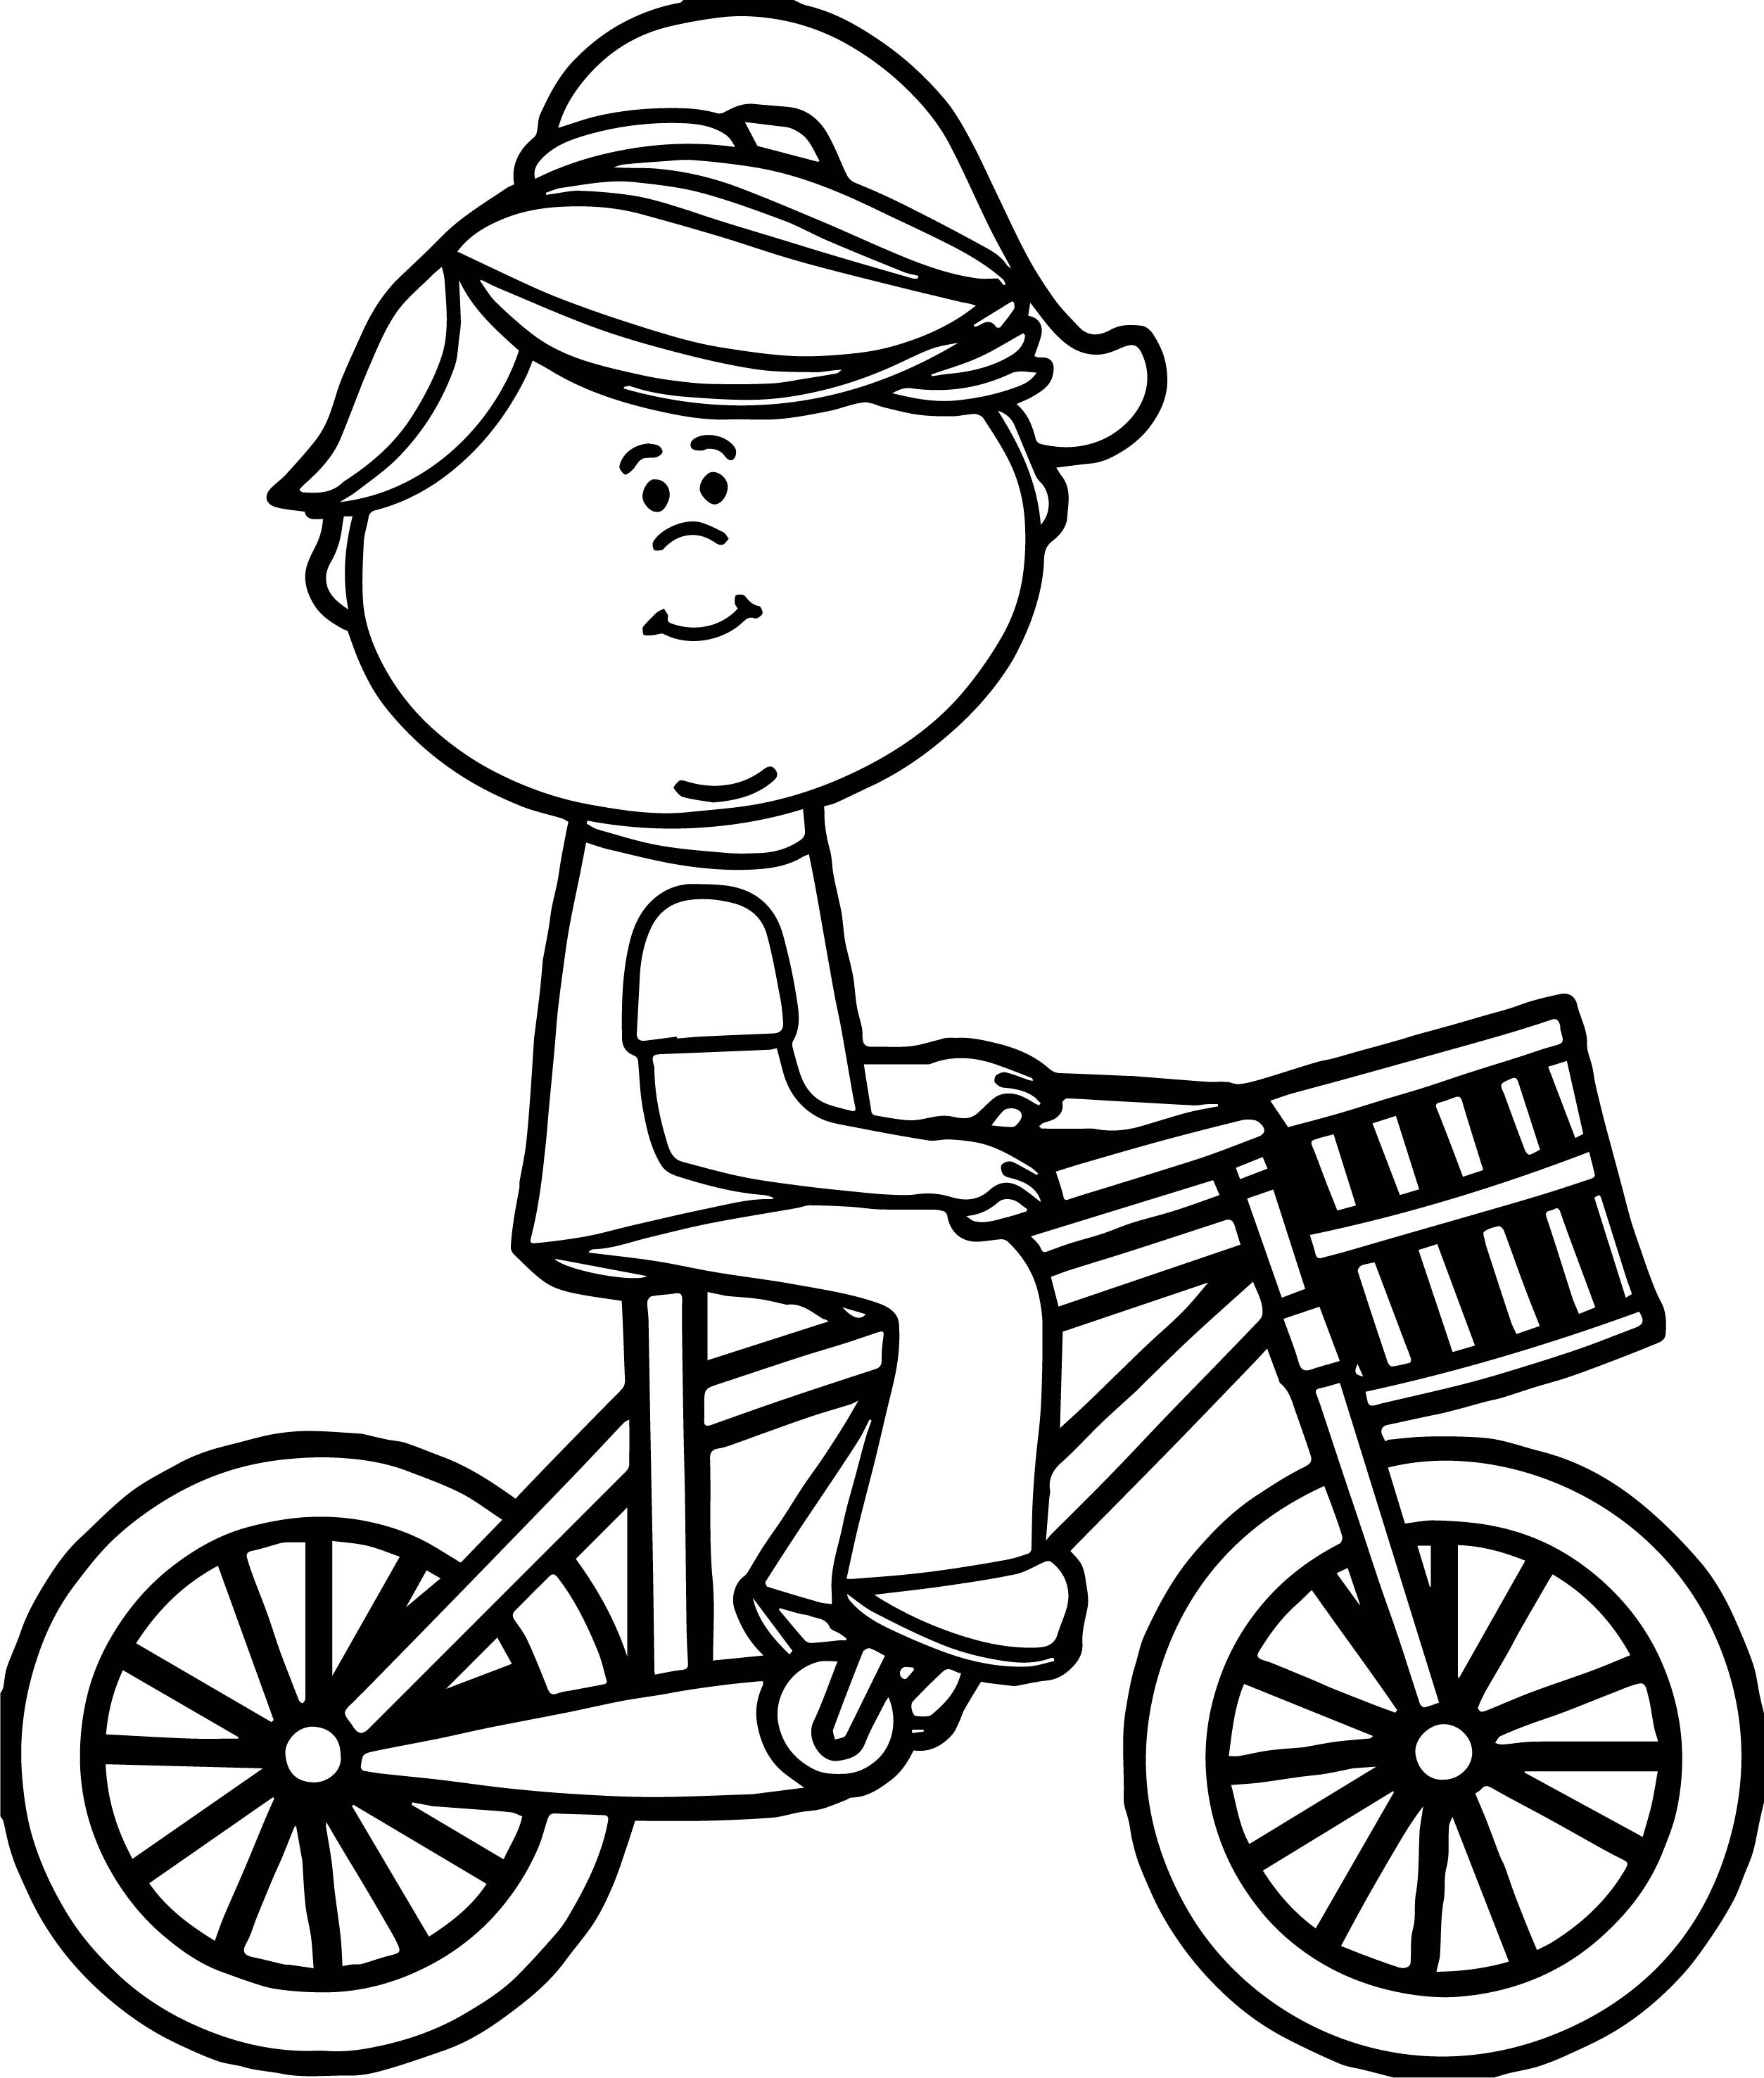 Cycling Coloring Pages at GetColorings.com | Free printable colorings